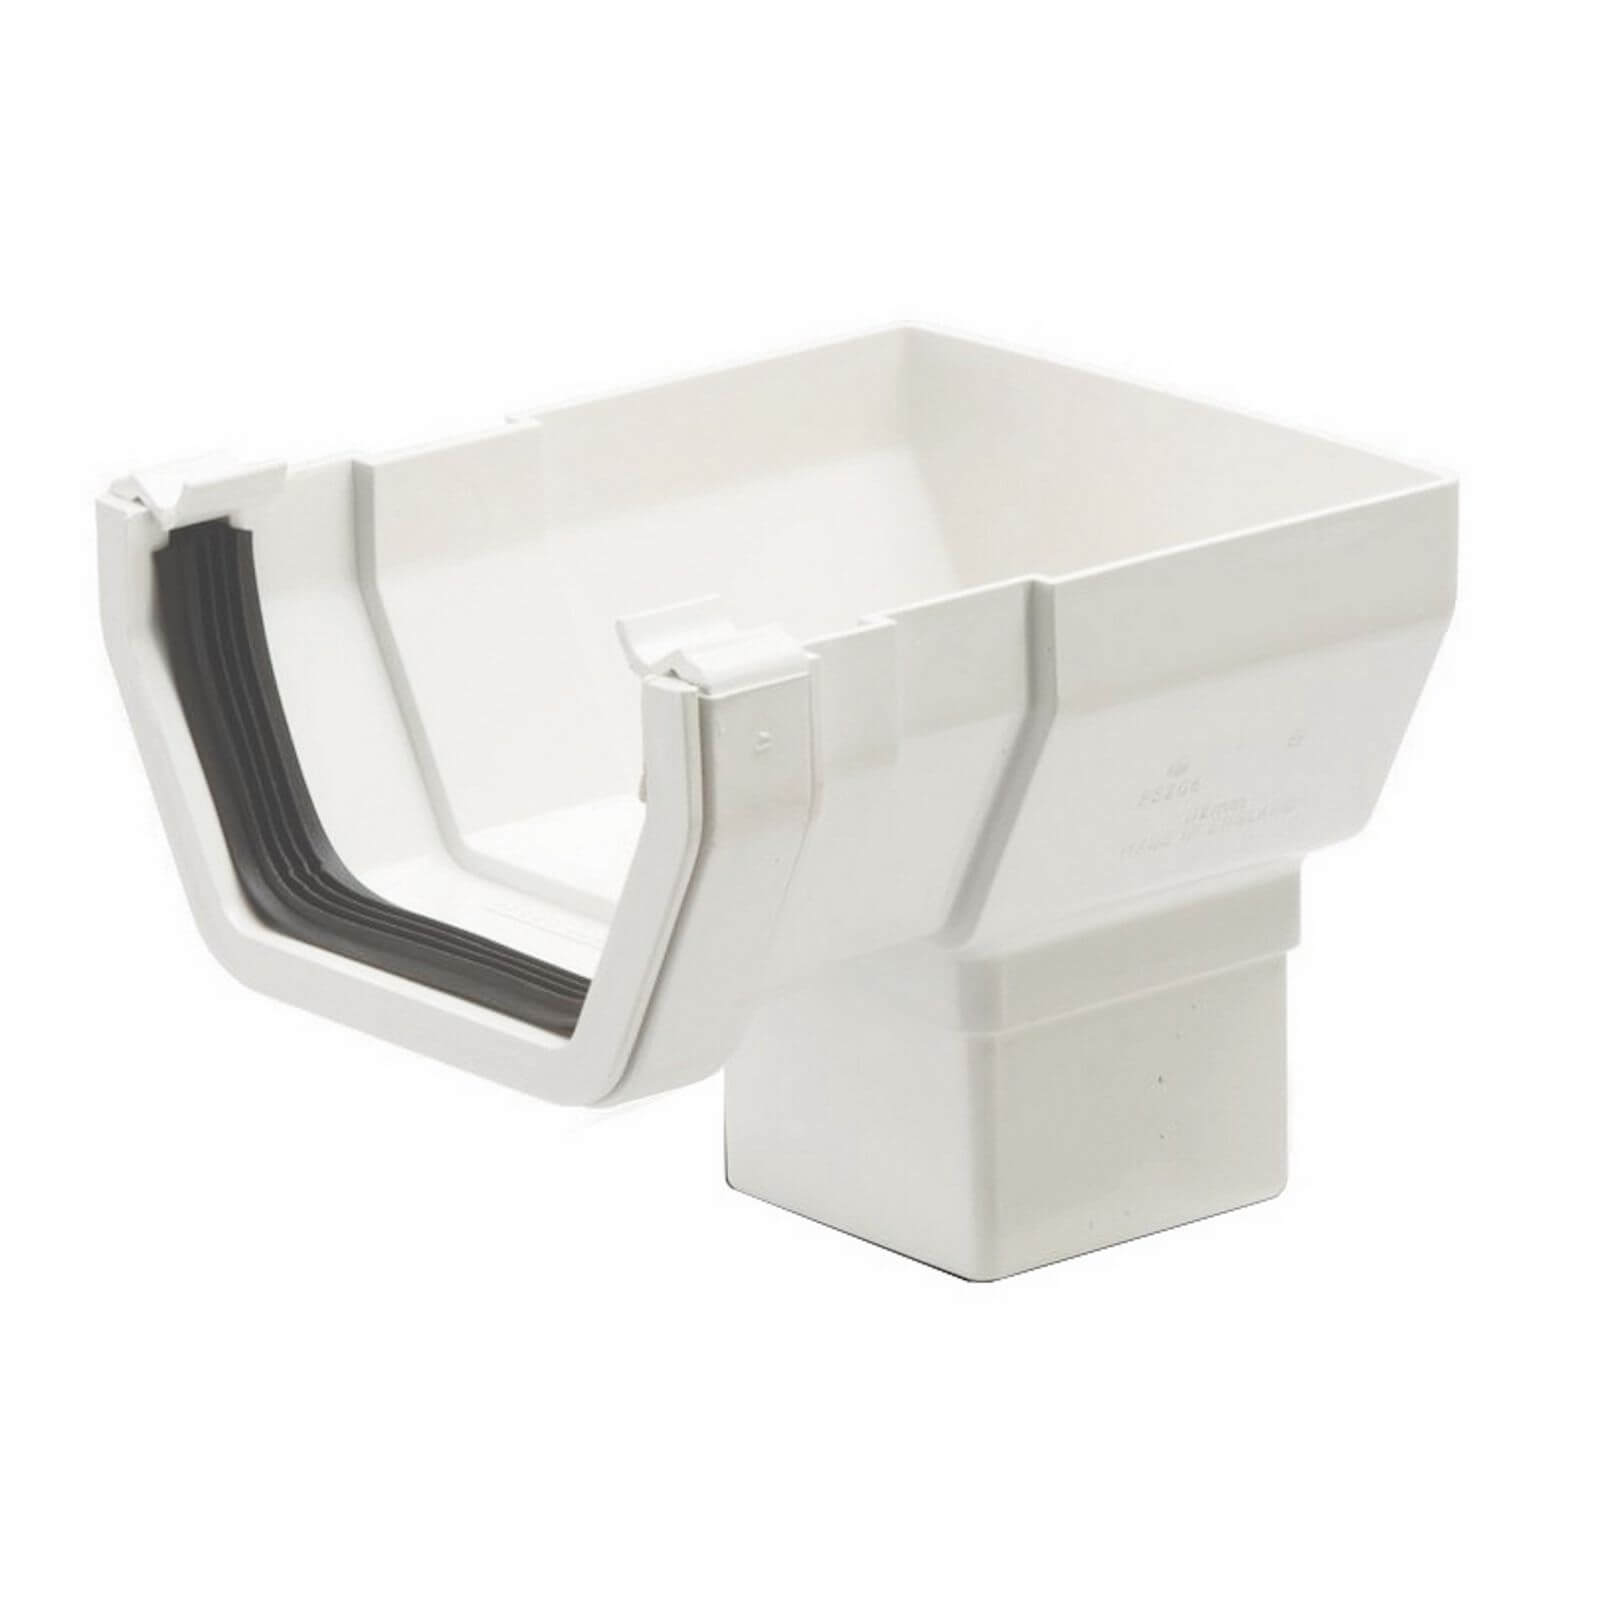 Polypipe Square Stop End Outlet - 112mm - White